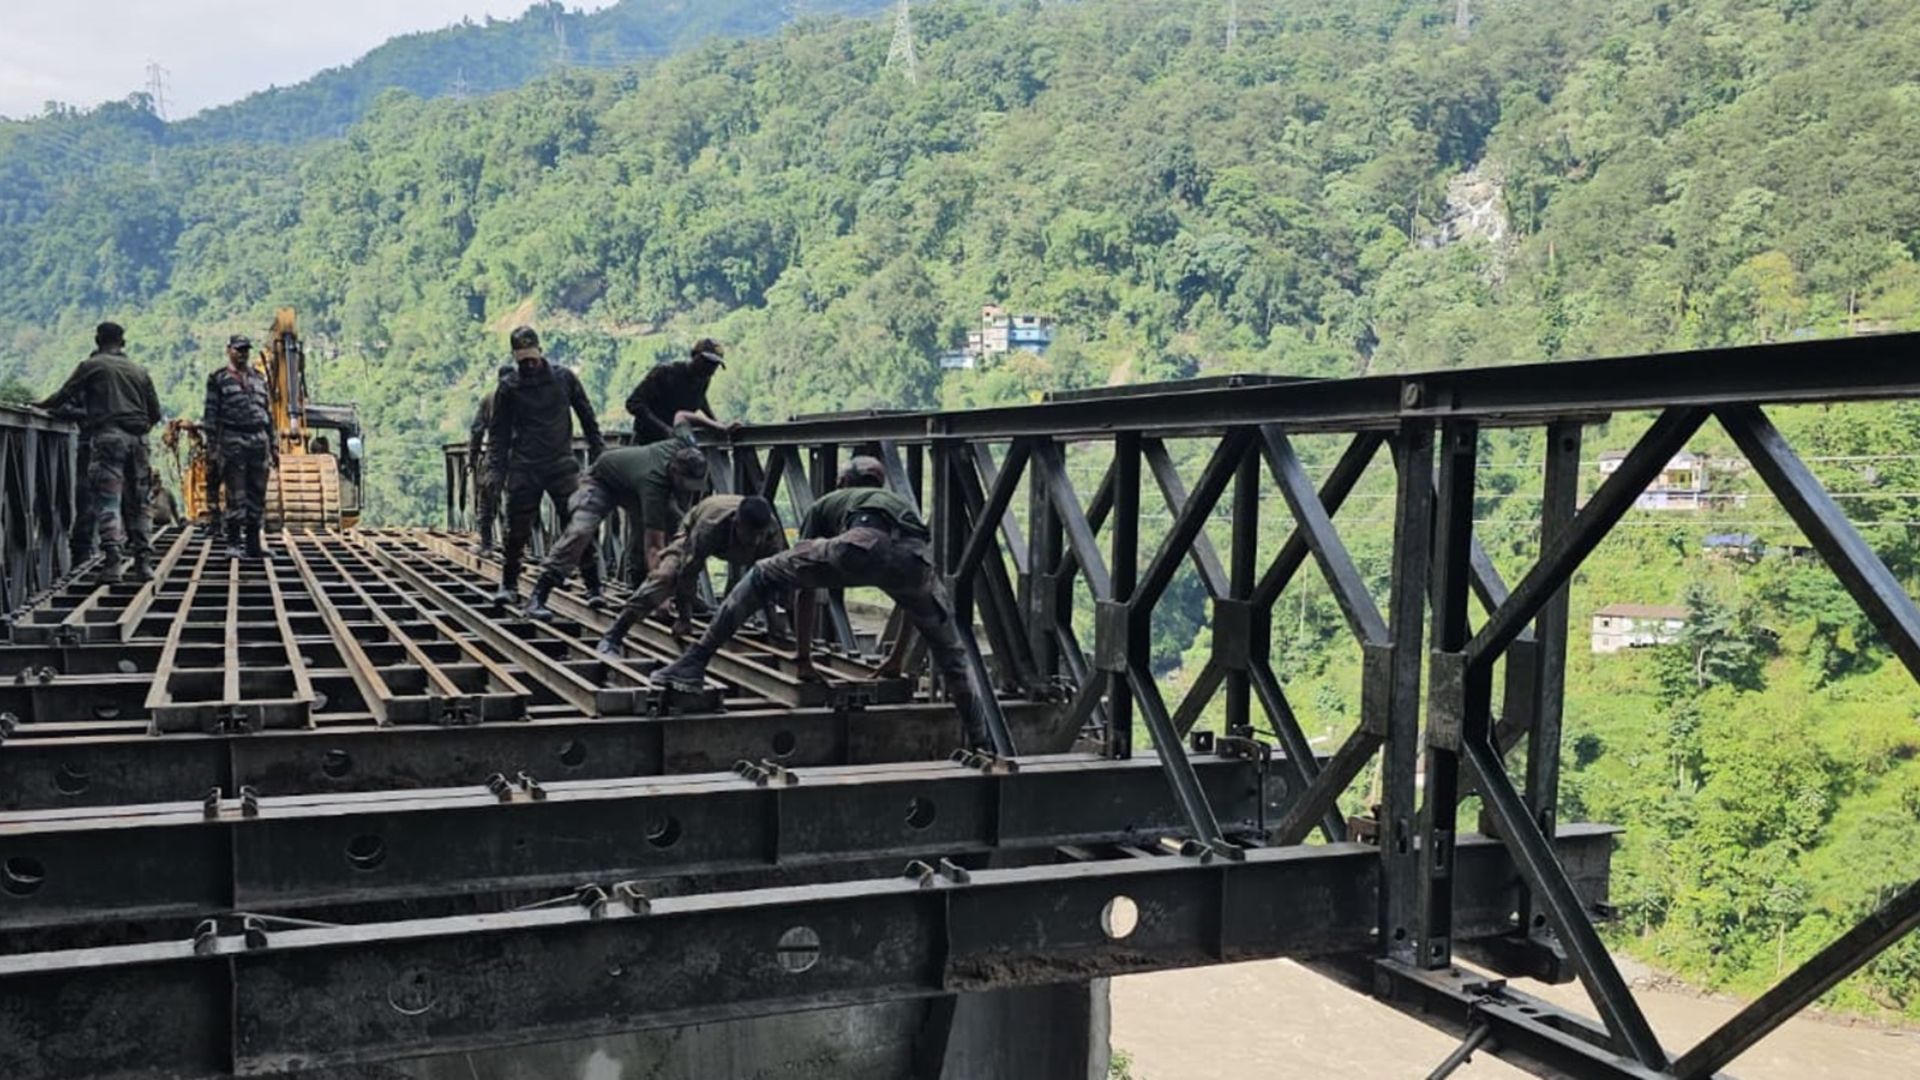 Indian Army Engineers Construct Bailey Bridge In Sikkim In 72 Hours To Restore Flood-Hit Connectivity